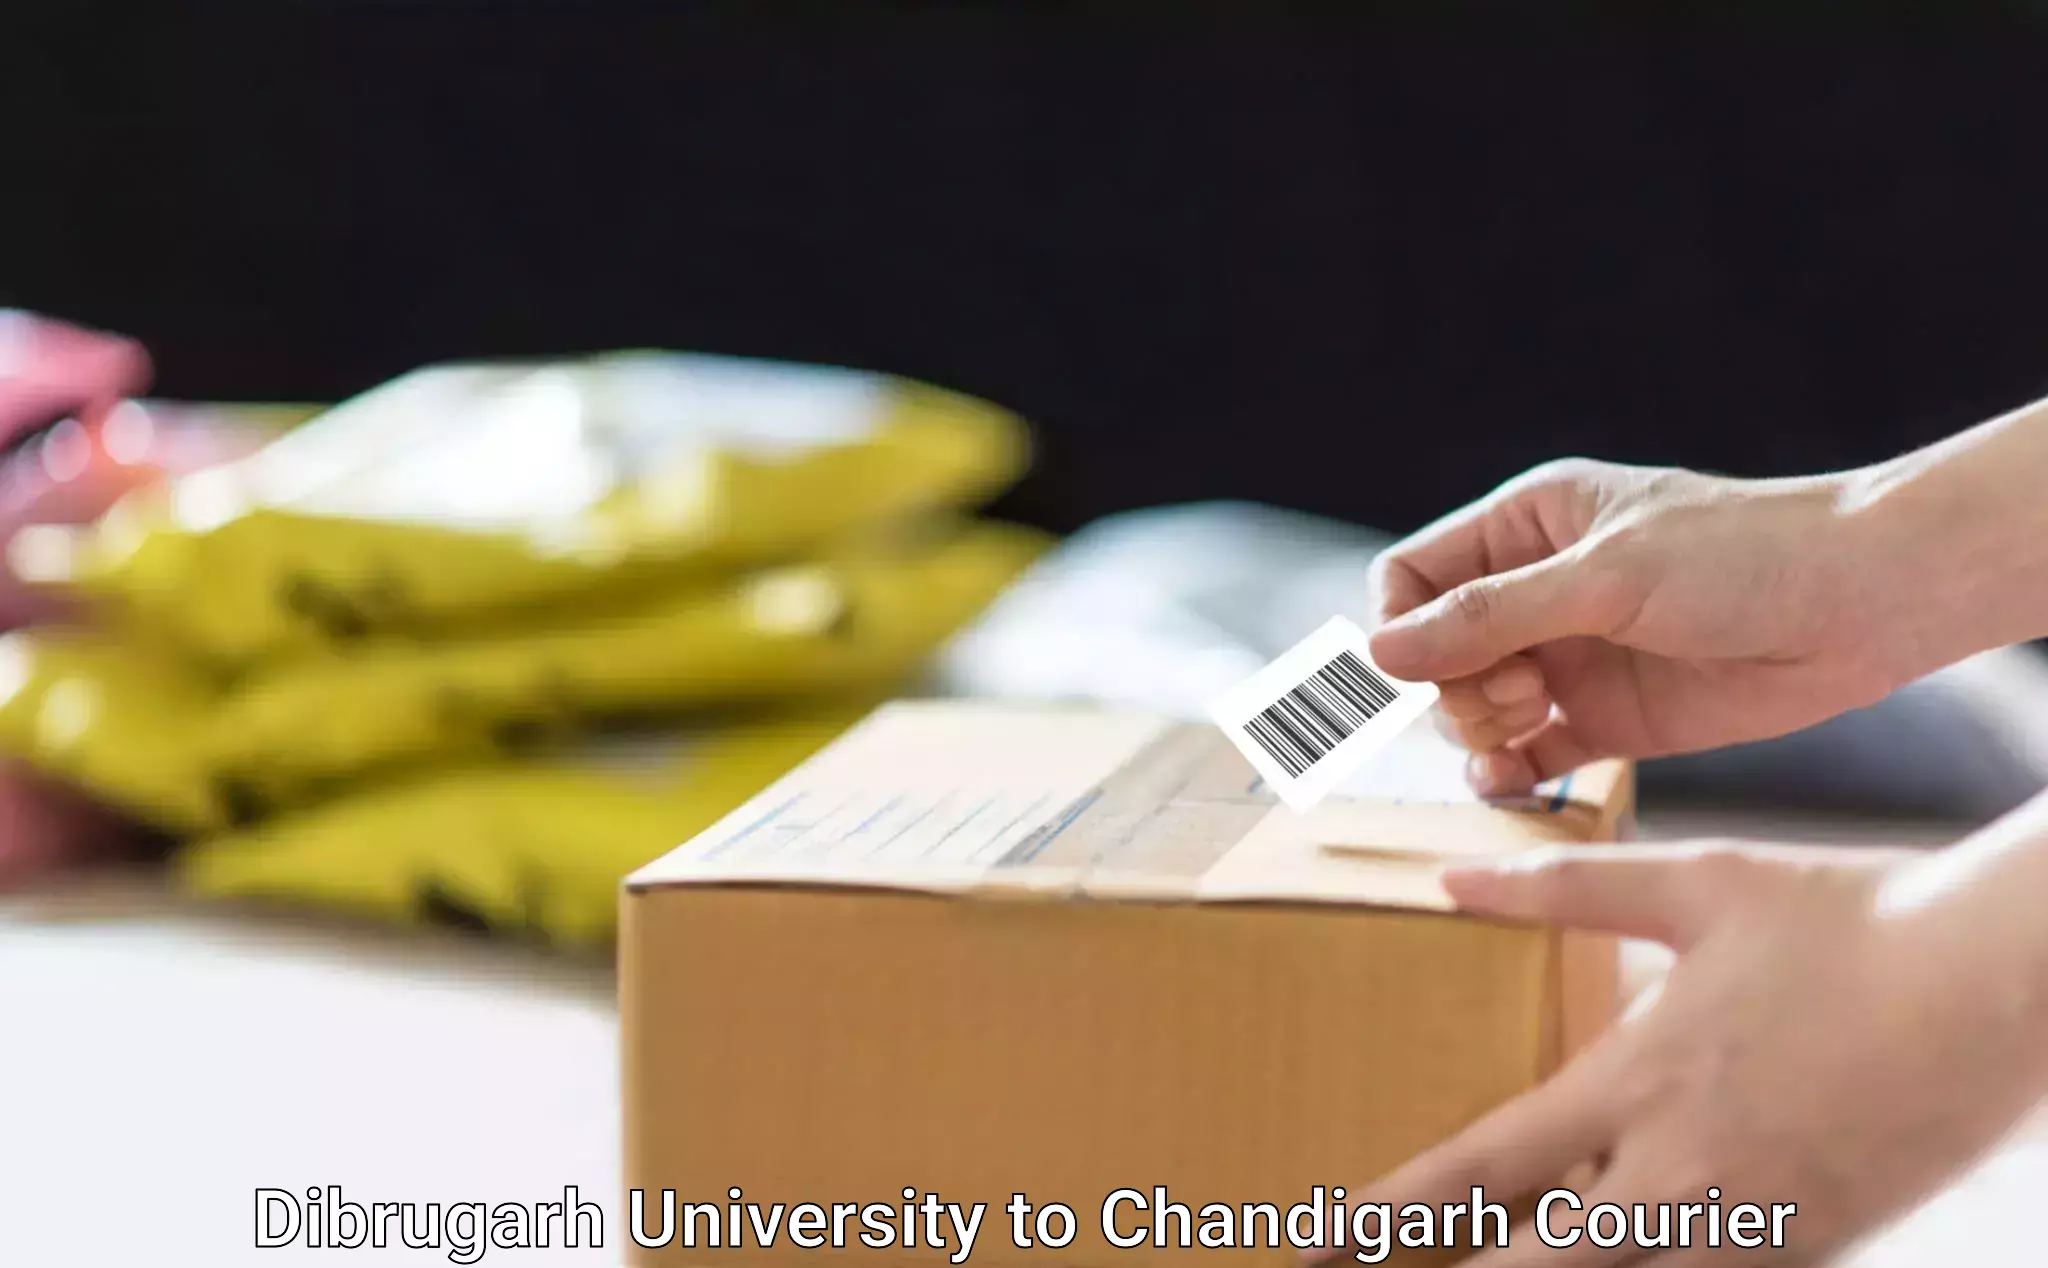 Reliable courier services in Dibrugarh University to Panjab University Chandigarh